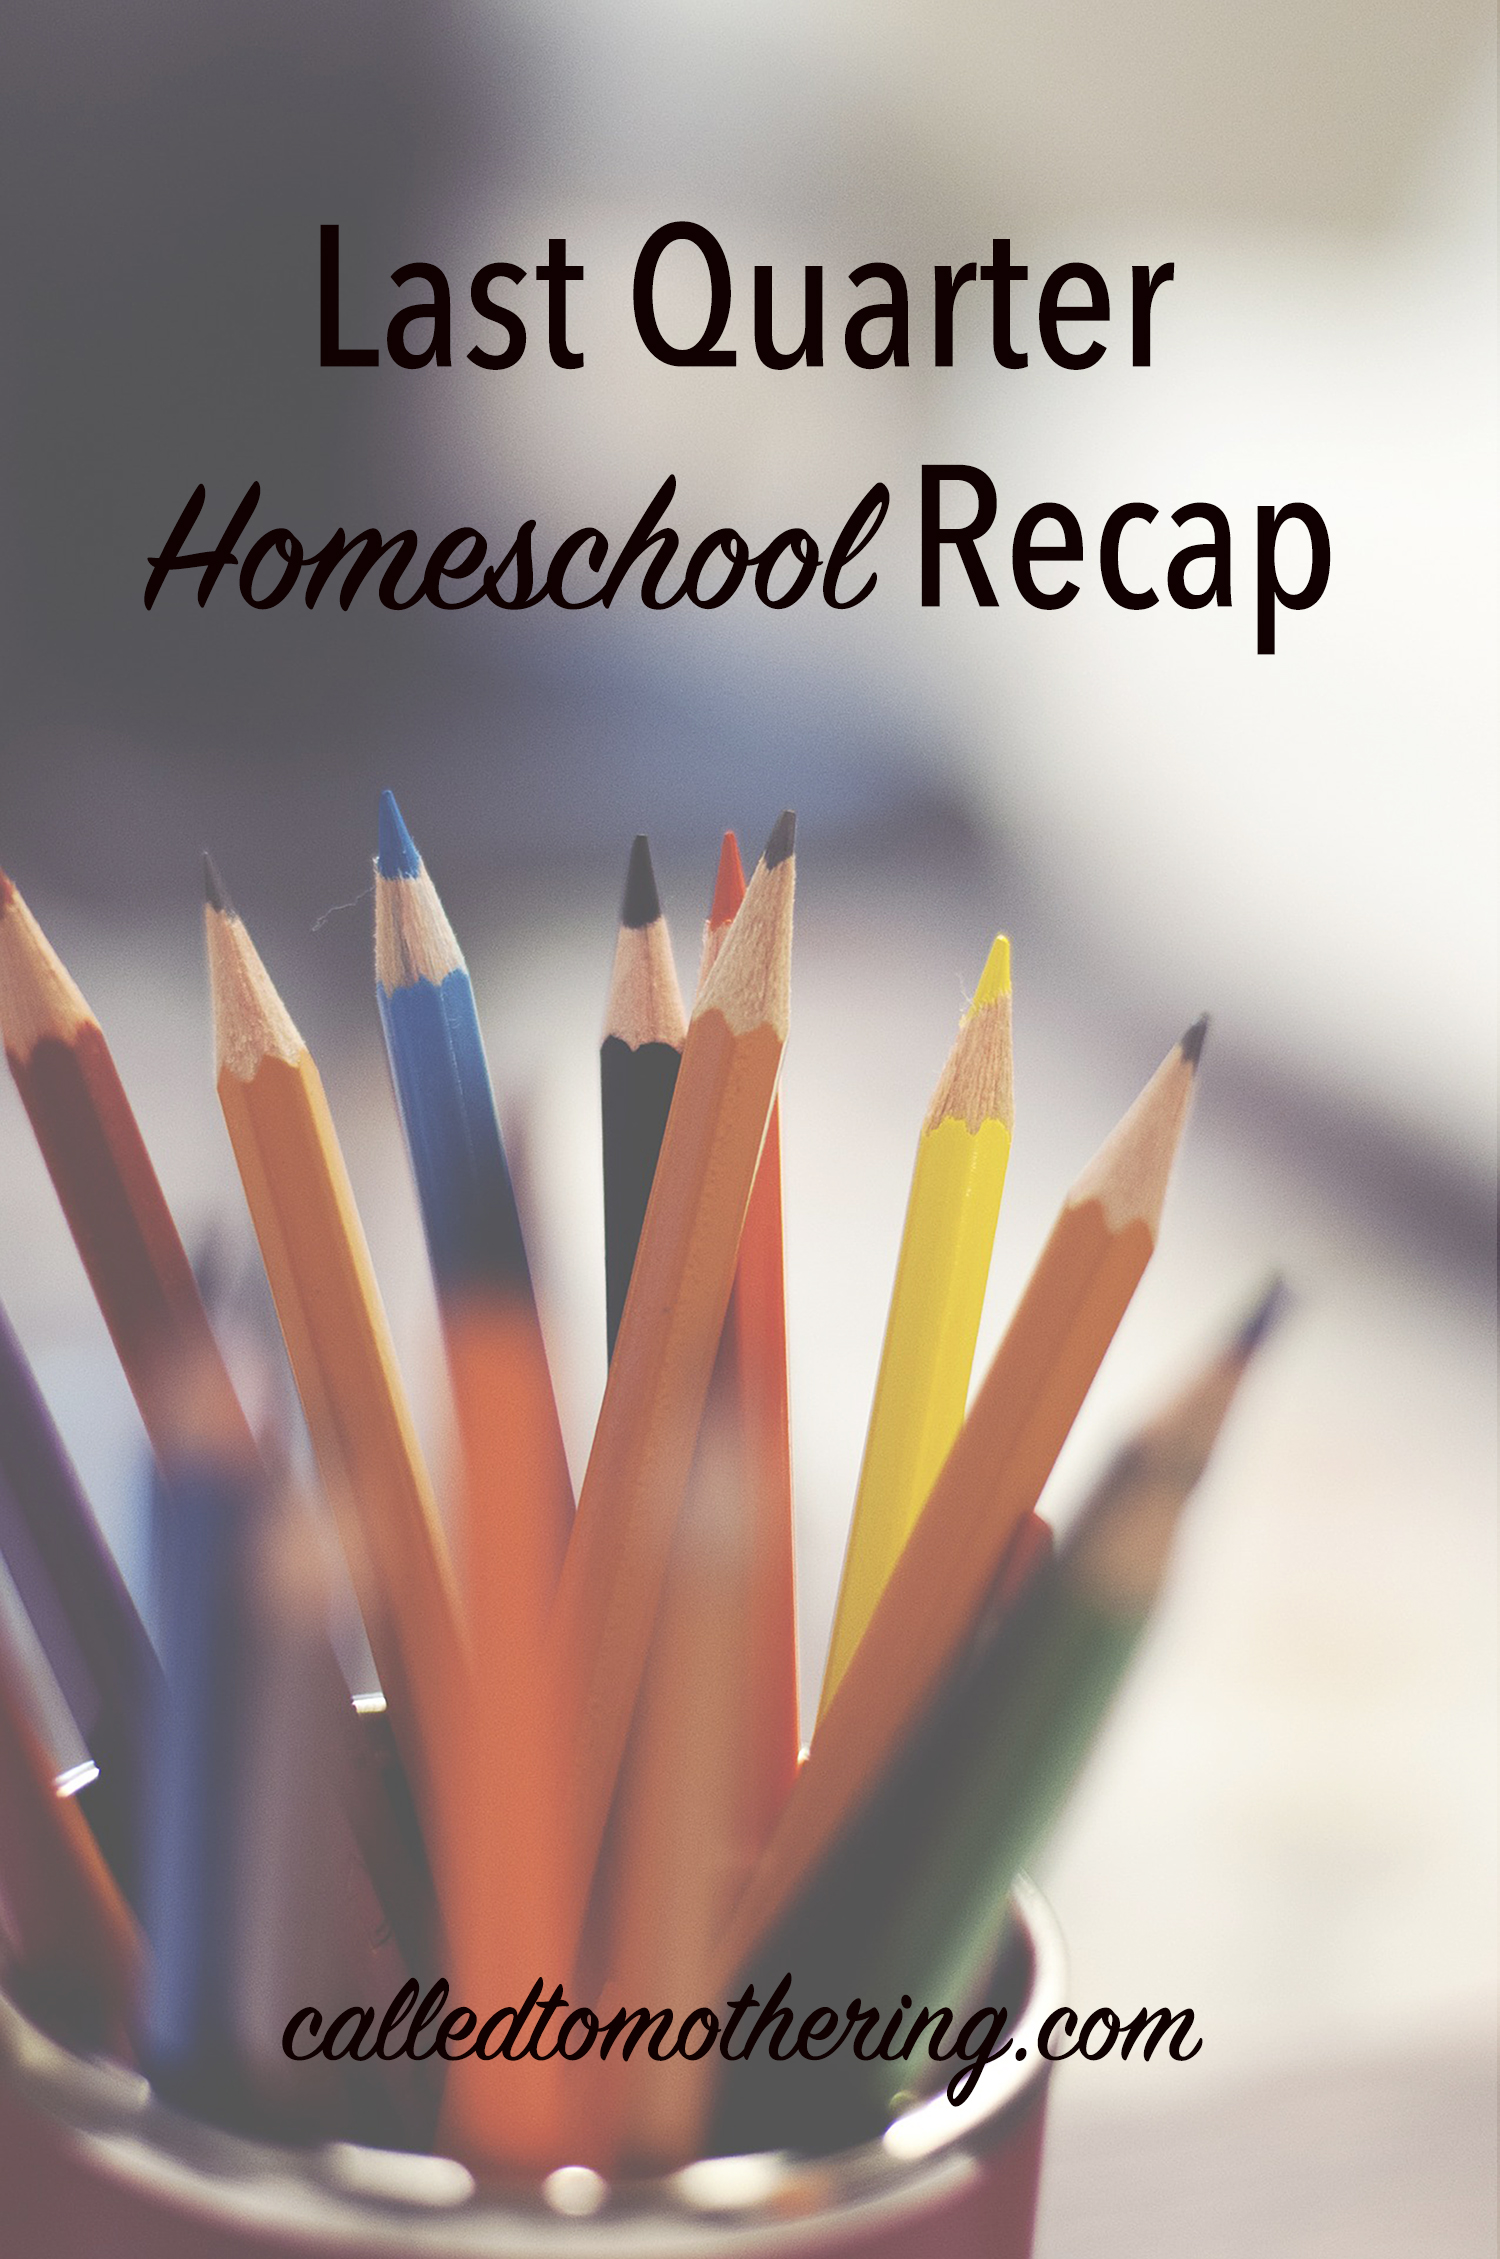 Hands-on learning in our homeschool